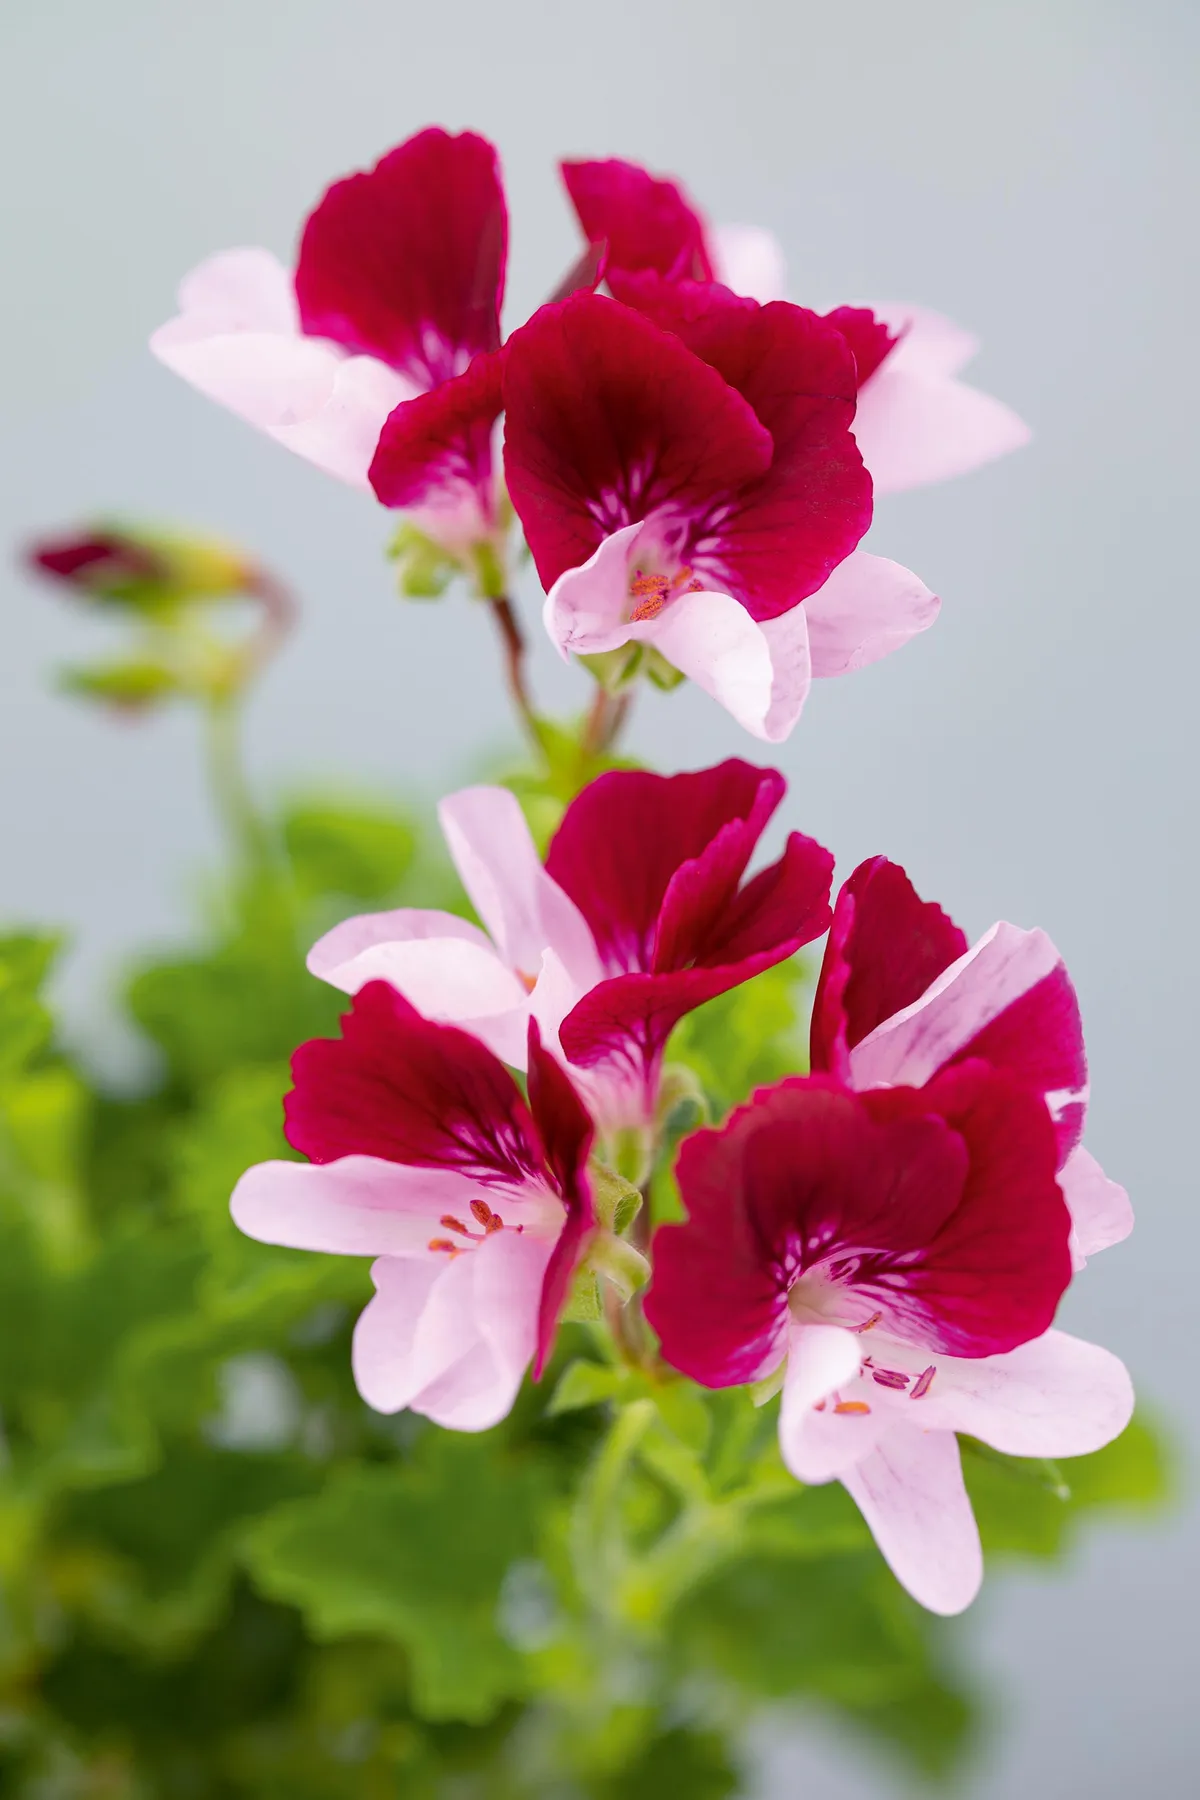 Pelargonium ‘Mole’. Bred in the UK and first introduced in 1994, this strong-growing, upright, bushy cultivar boasts showy, pale-lavender lower petals with purple feathering over a long season. The upper petals are deep burgundy-red, feathered dark red. 30cm. RHS H1C, USDA 9b-13.